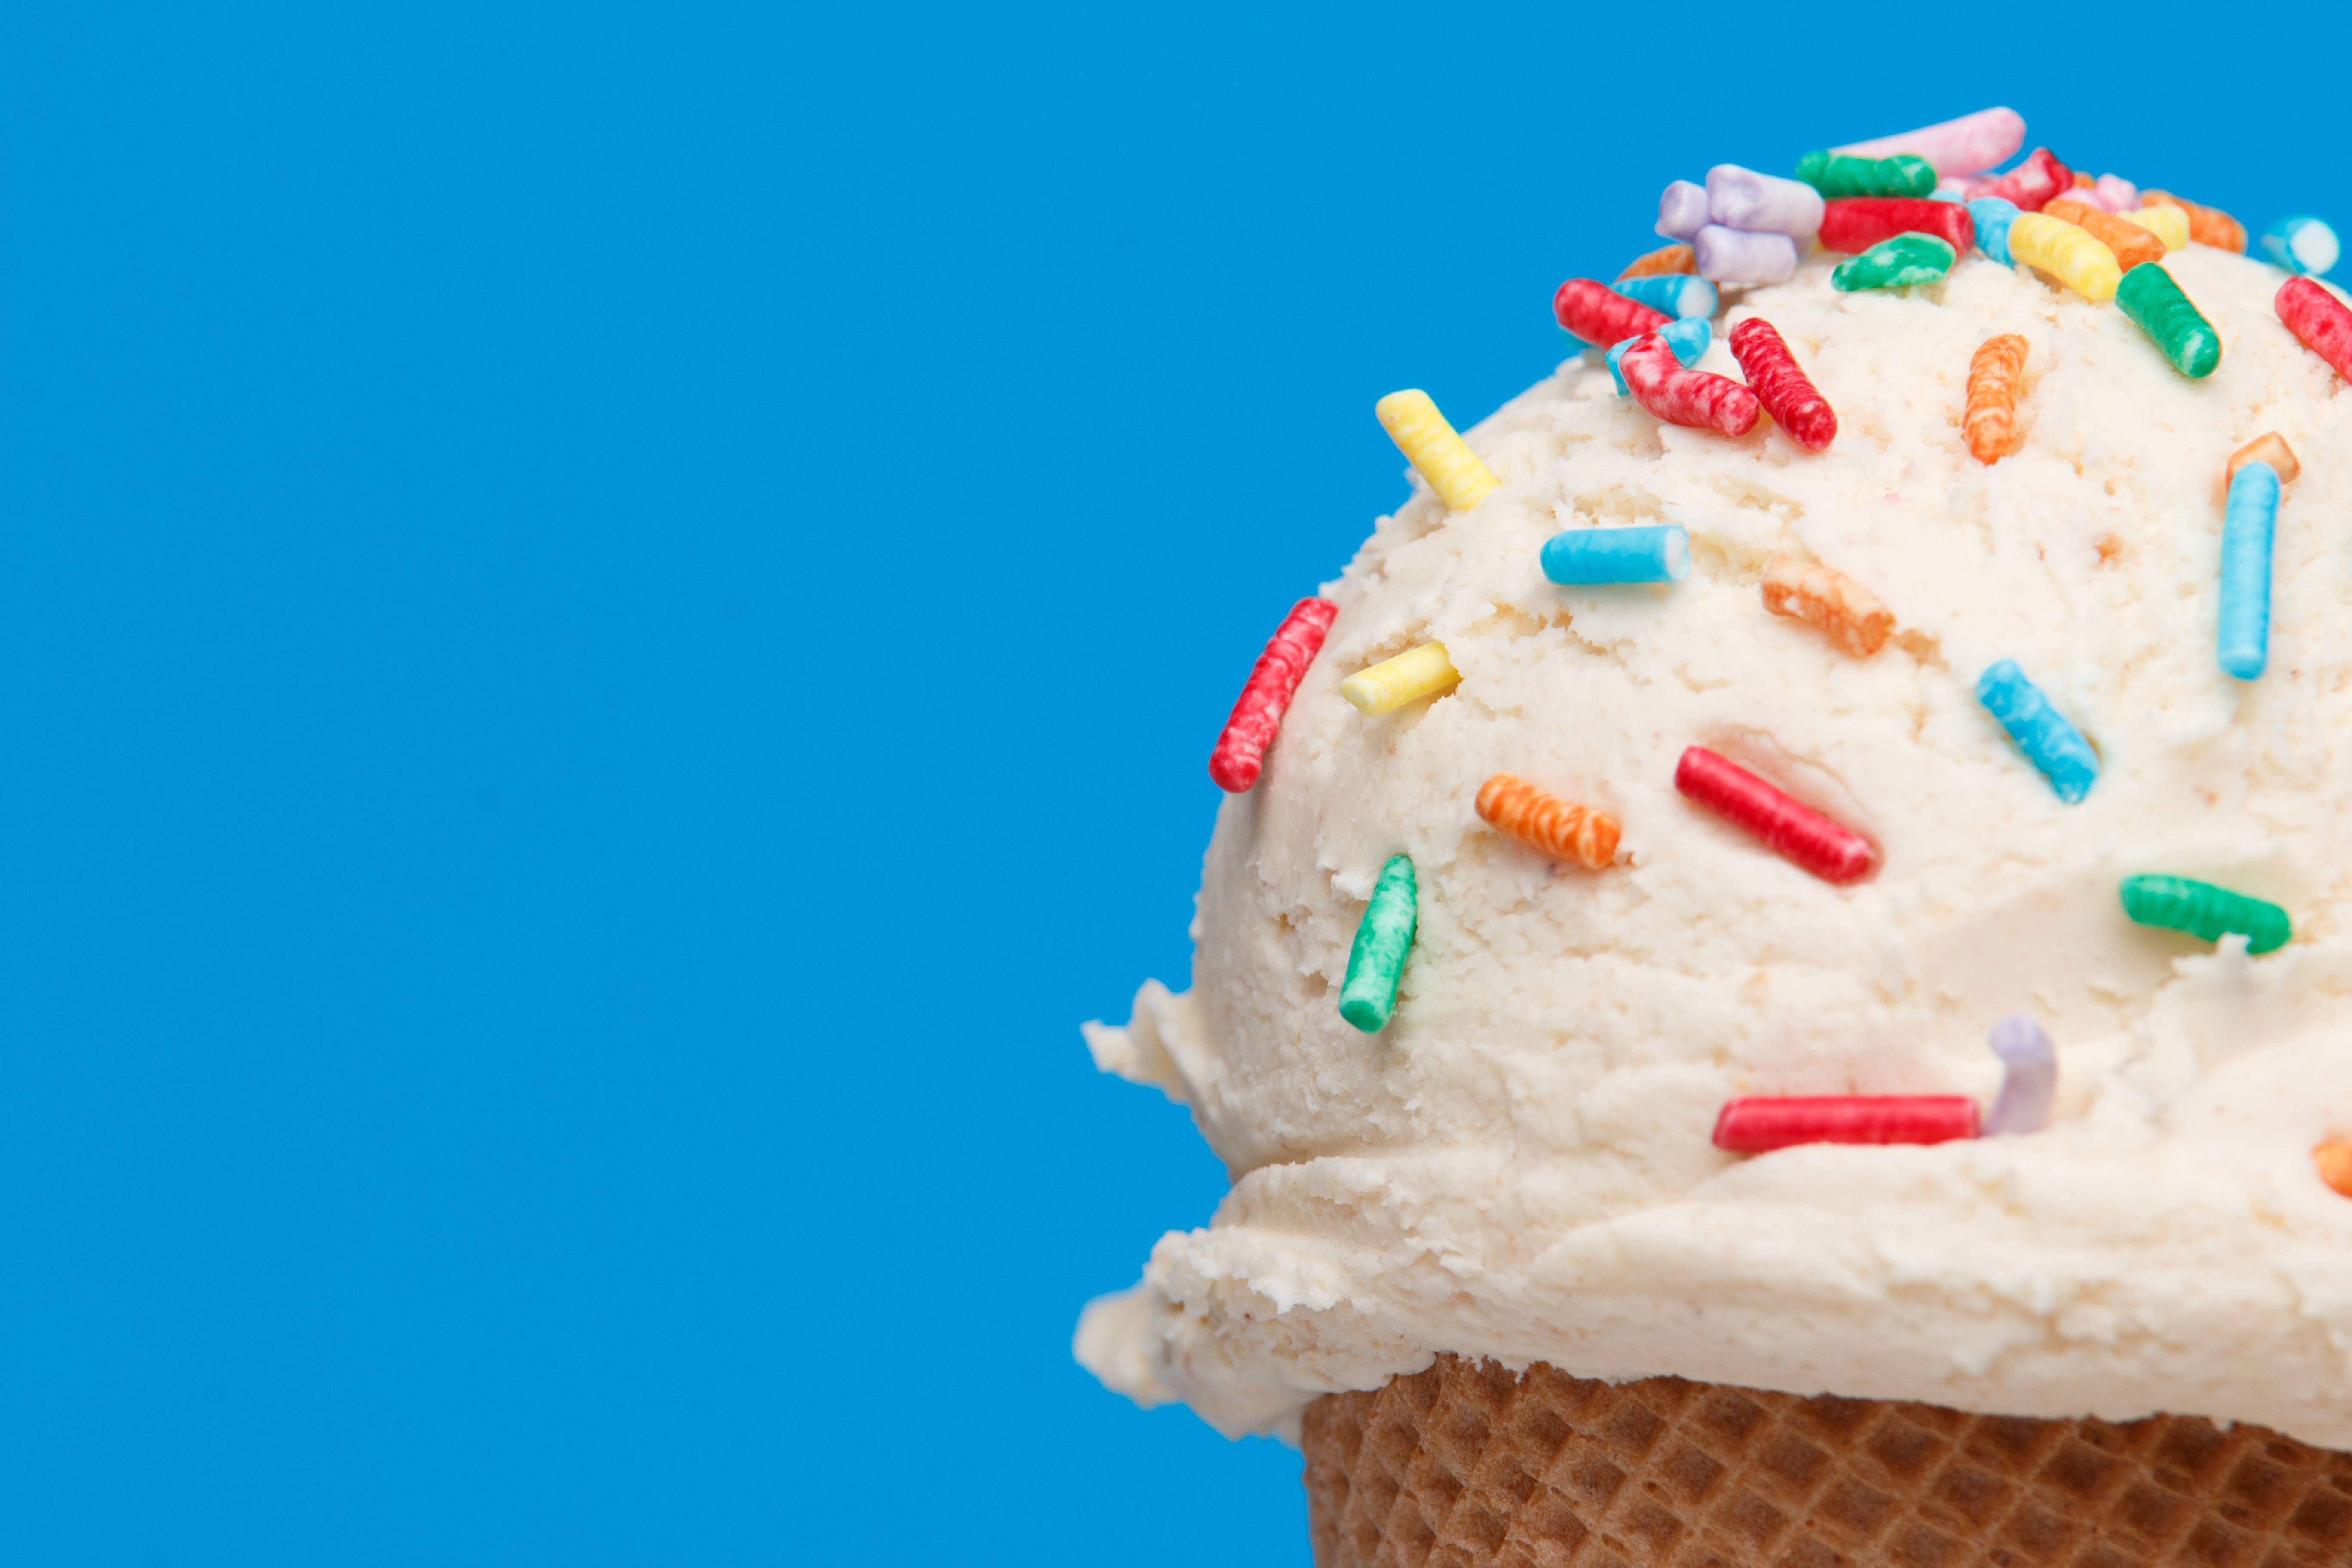 ice cream with topics on colorful background - Calorie ...